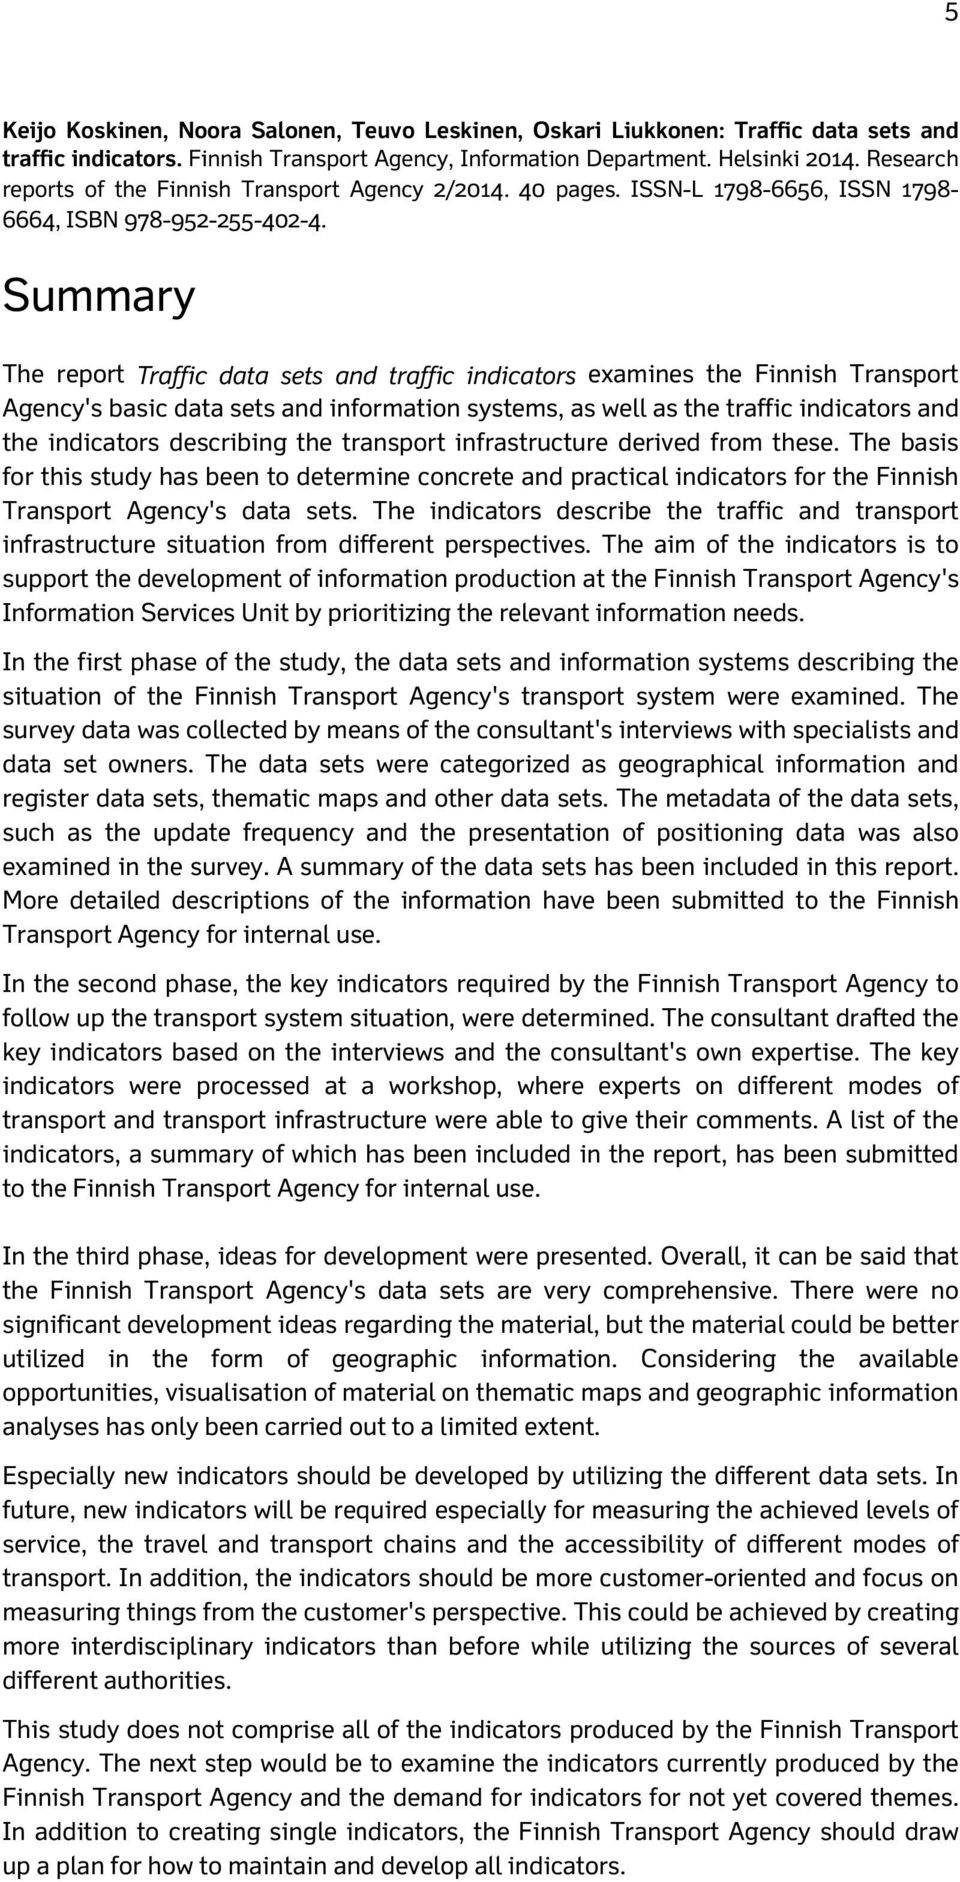 Summary The report Traffic data sets and traffic indicators examines the Finnish Transport Agency's basic data sets and information systems, as well as the traffic indicators and the indicators